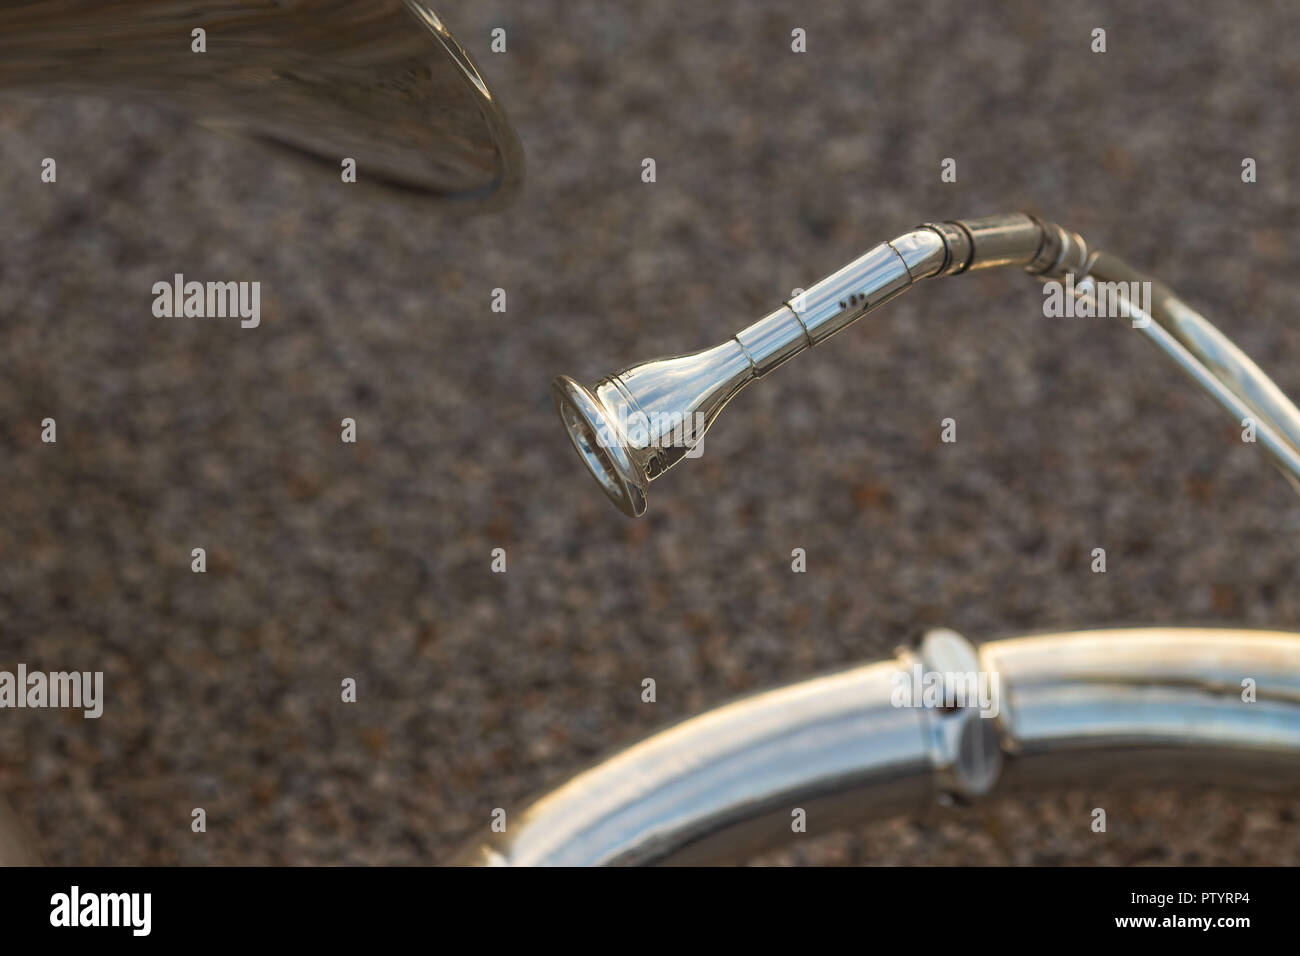 a close up of the mouthpiece of a sousaphone resting on the ground during a marching band rehearsal Stock Photo